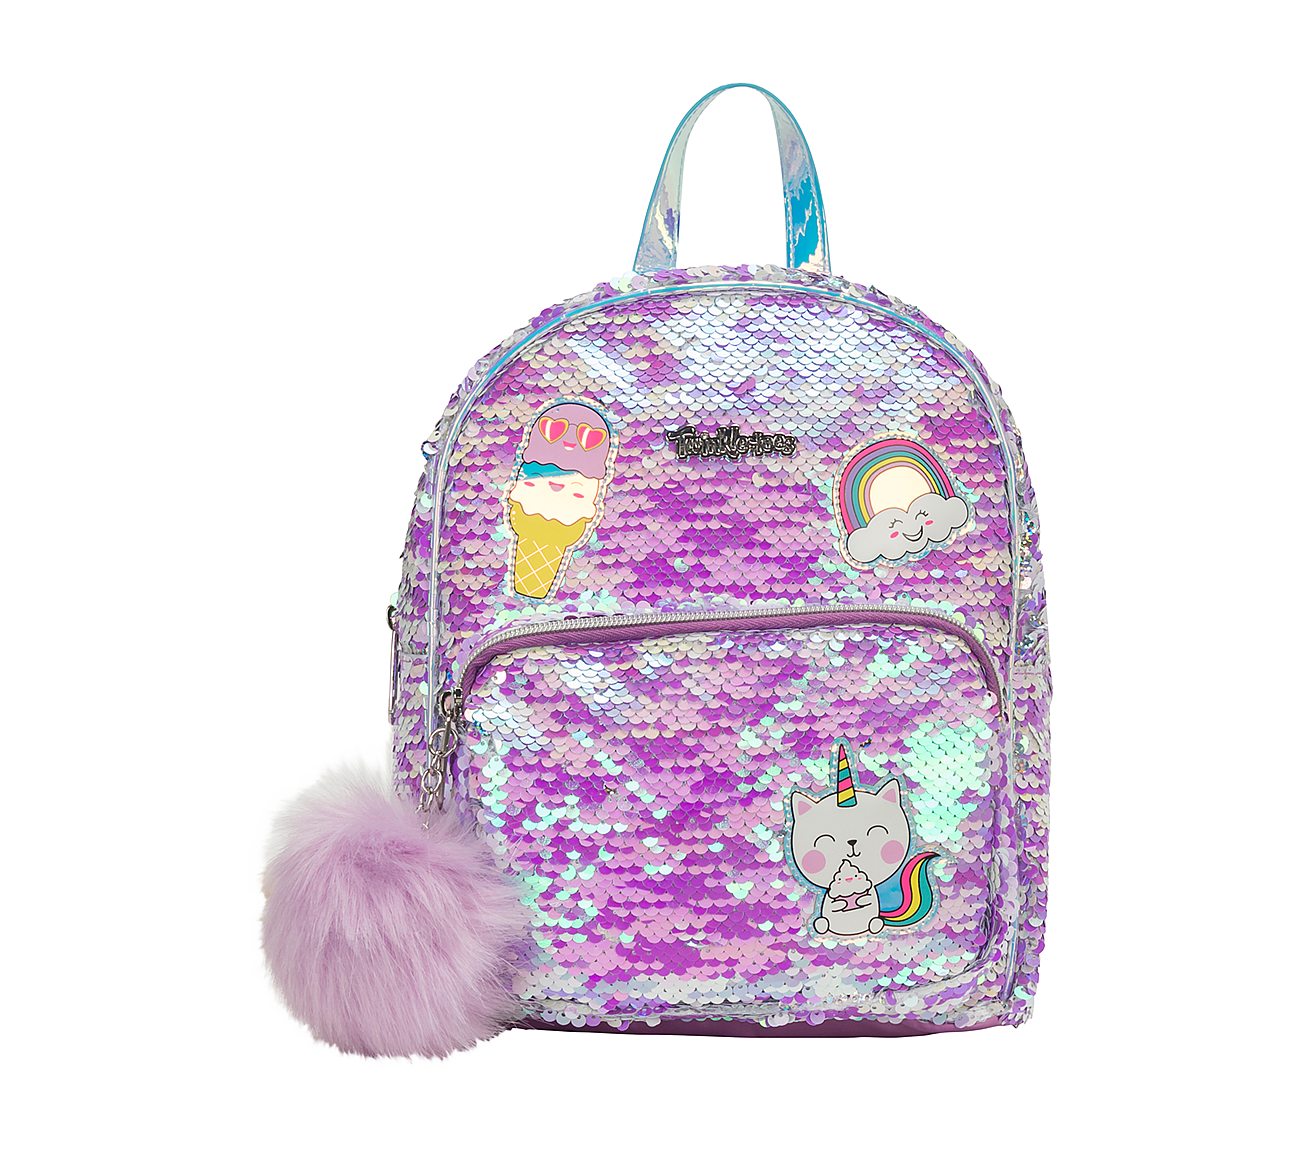 Buy SKECHERS Twinkle Toes: Patch Party Mini Backpack Twinkle Toes Shoes